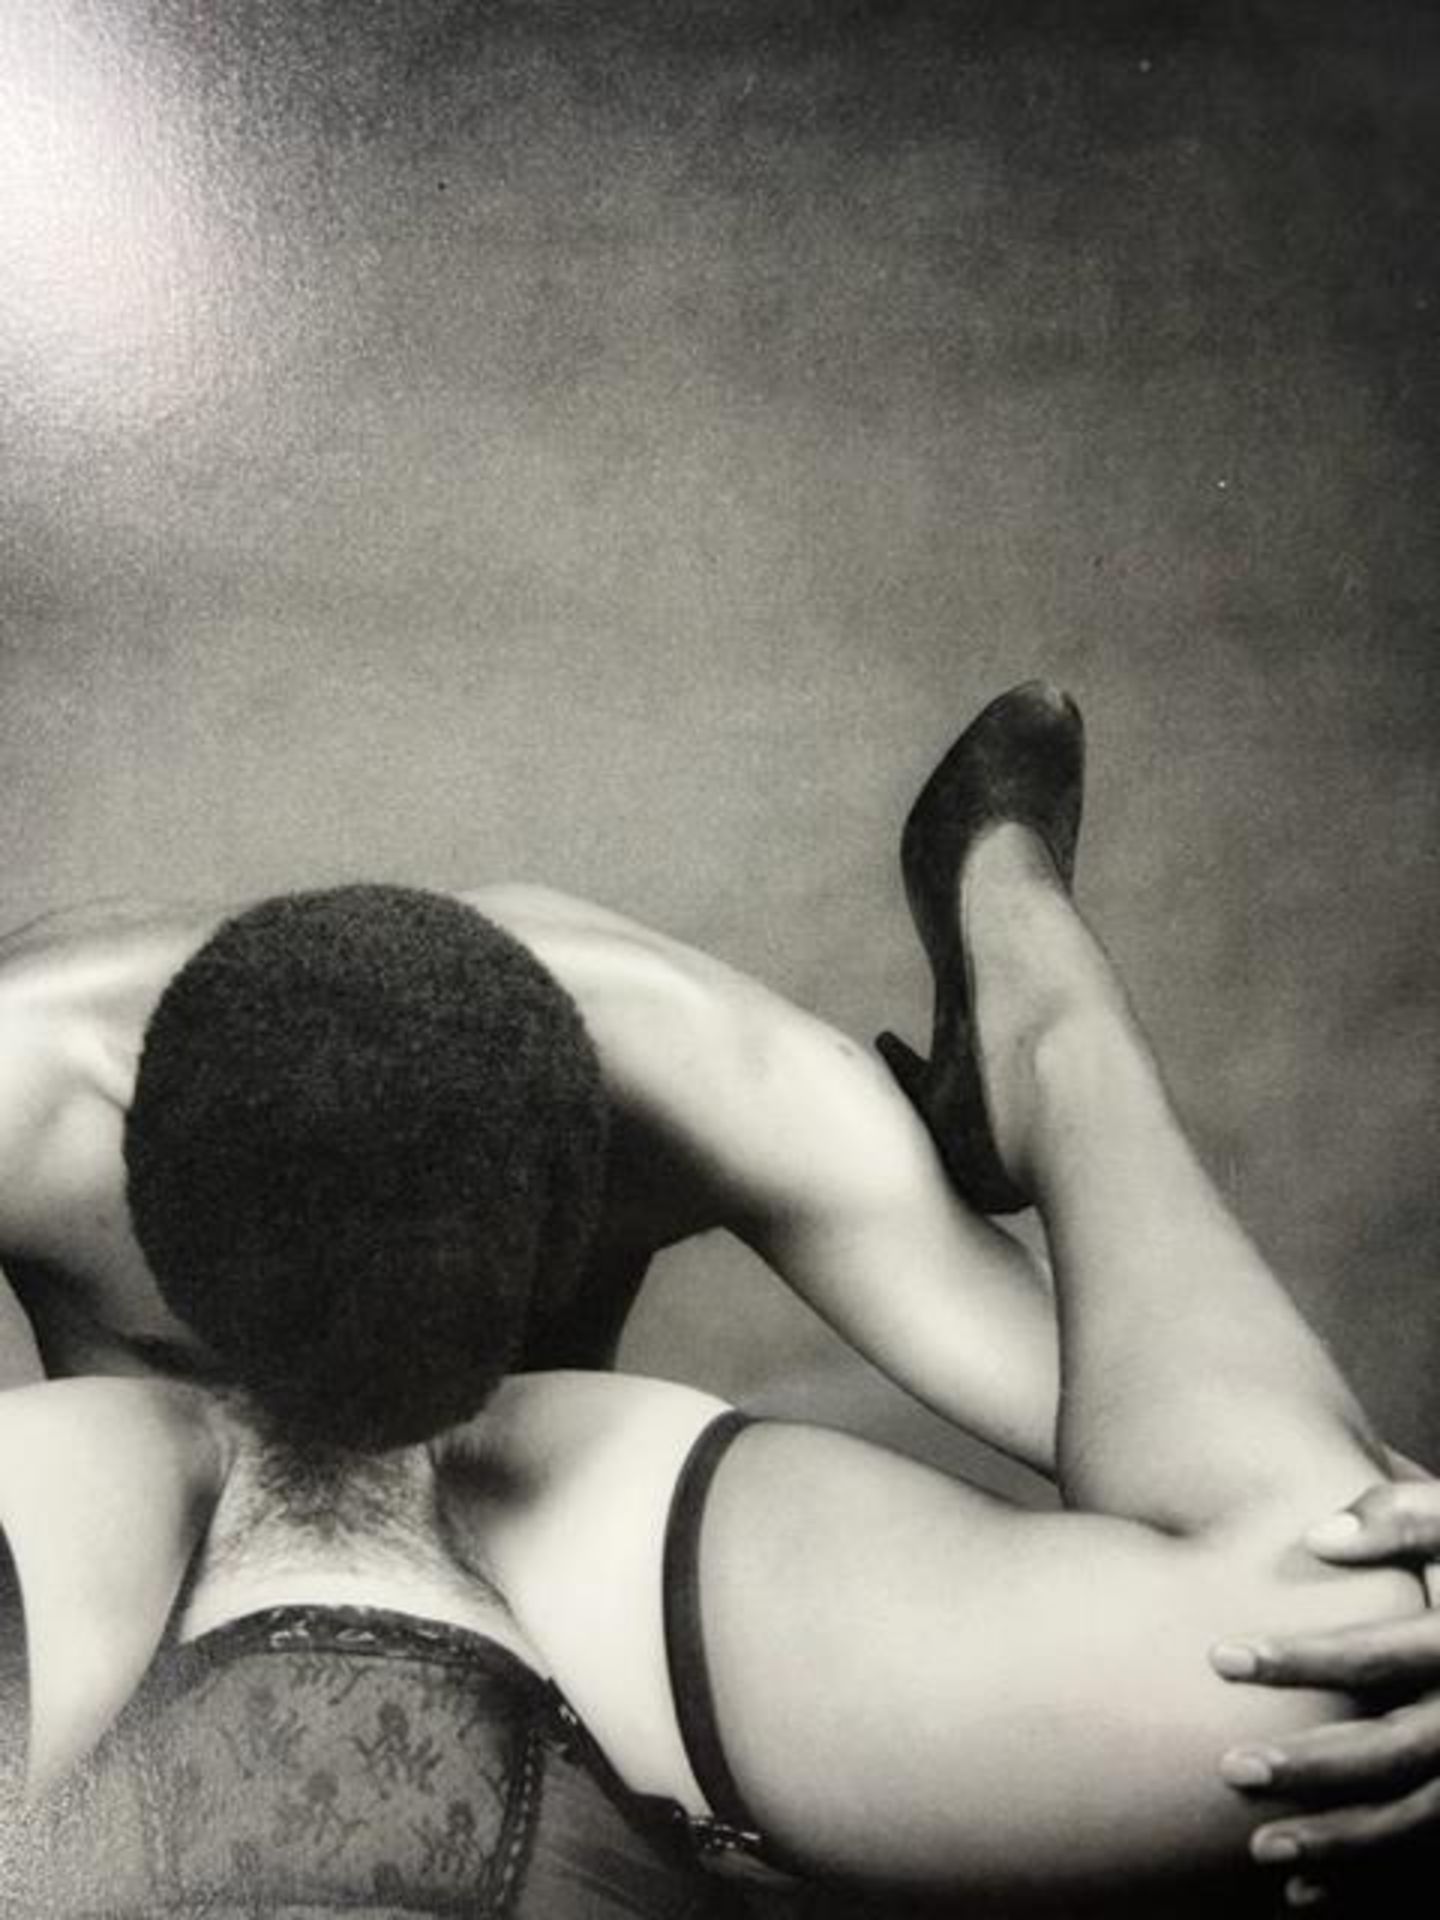 Robert Mapplethorpe "Marty and Veronica" Print. - Image 5 of 6